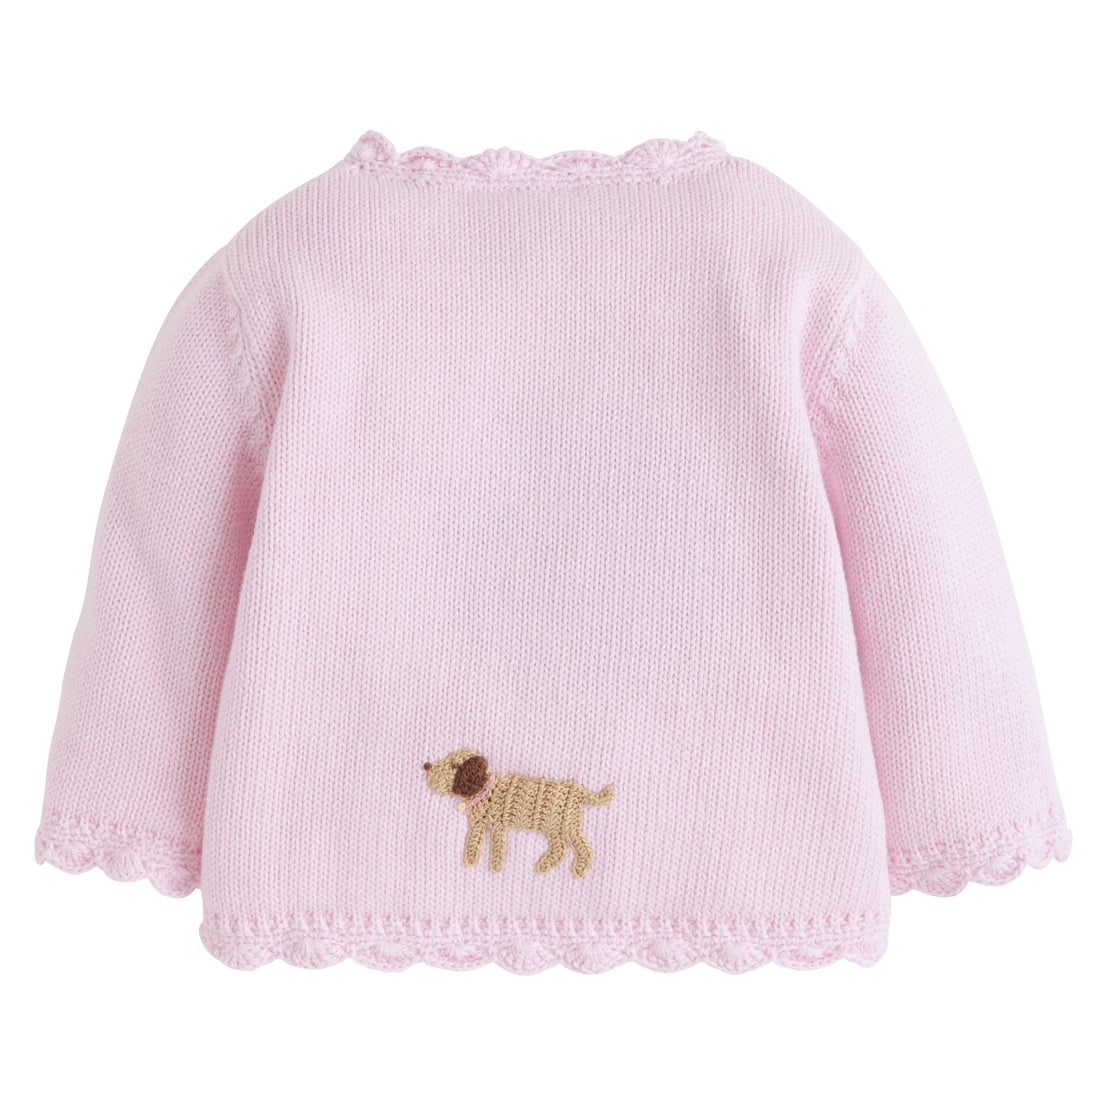 Little English traditional crochet sweater, pink lab crochet sweater for baby girl